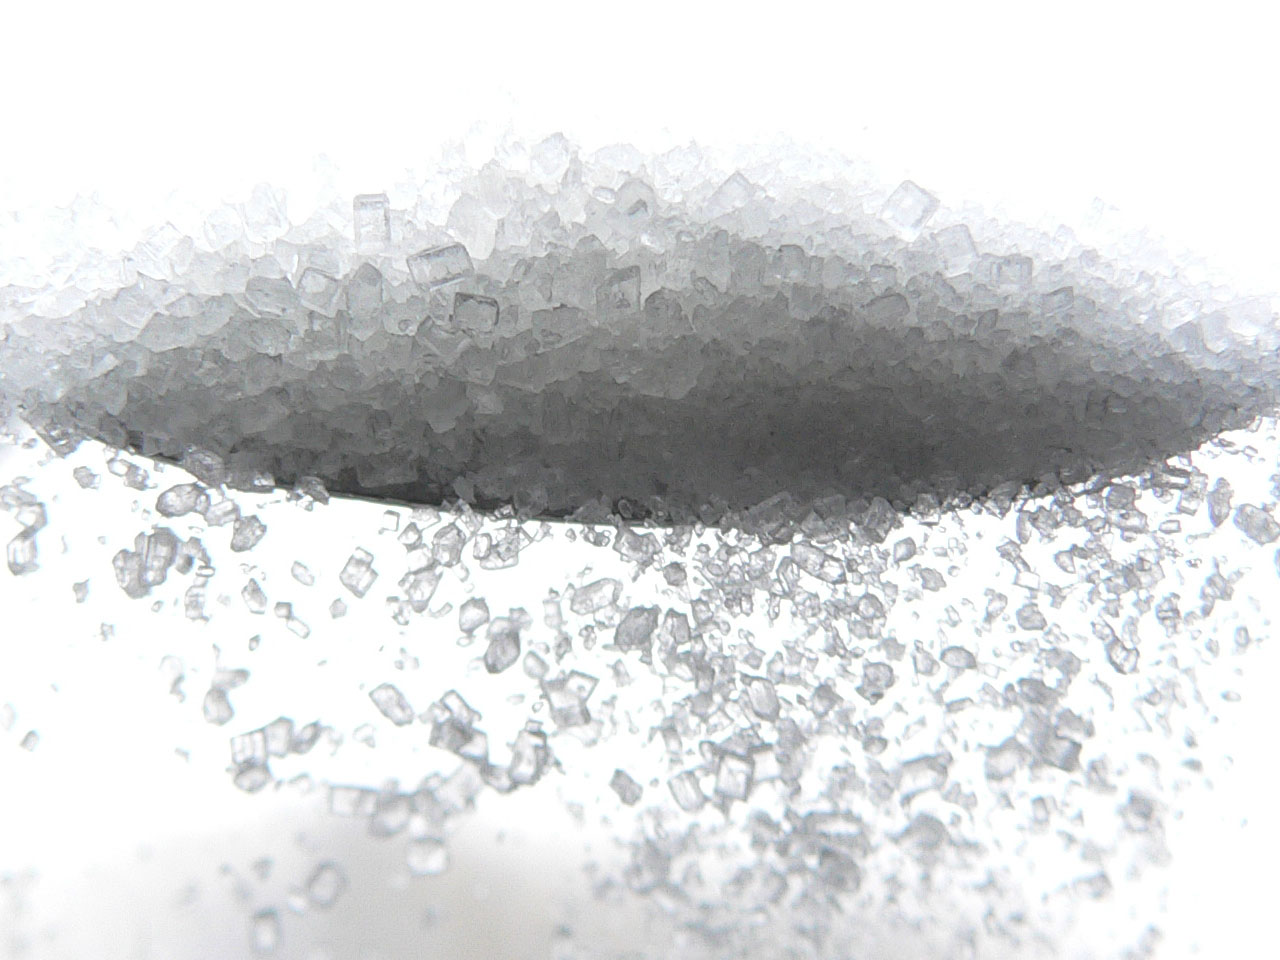 New Sugar Substitute: Nanoparticles Of Sand Coated In Sugar